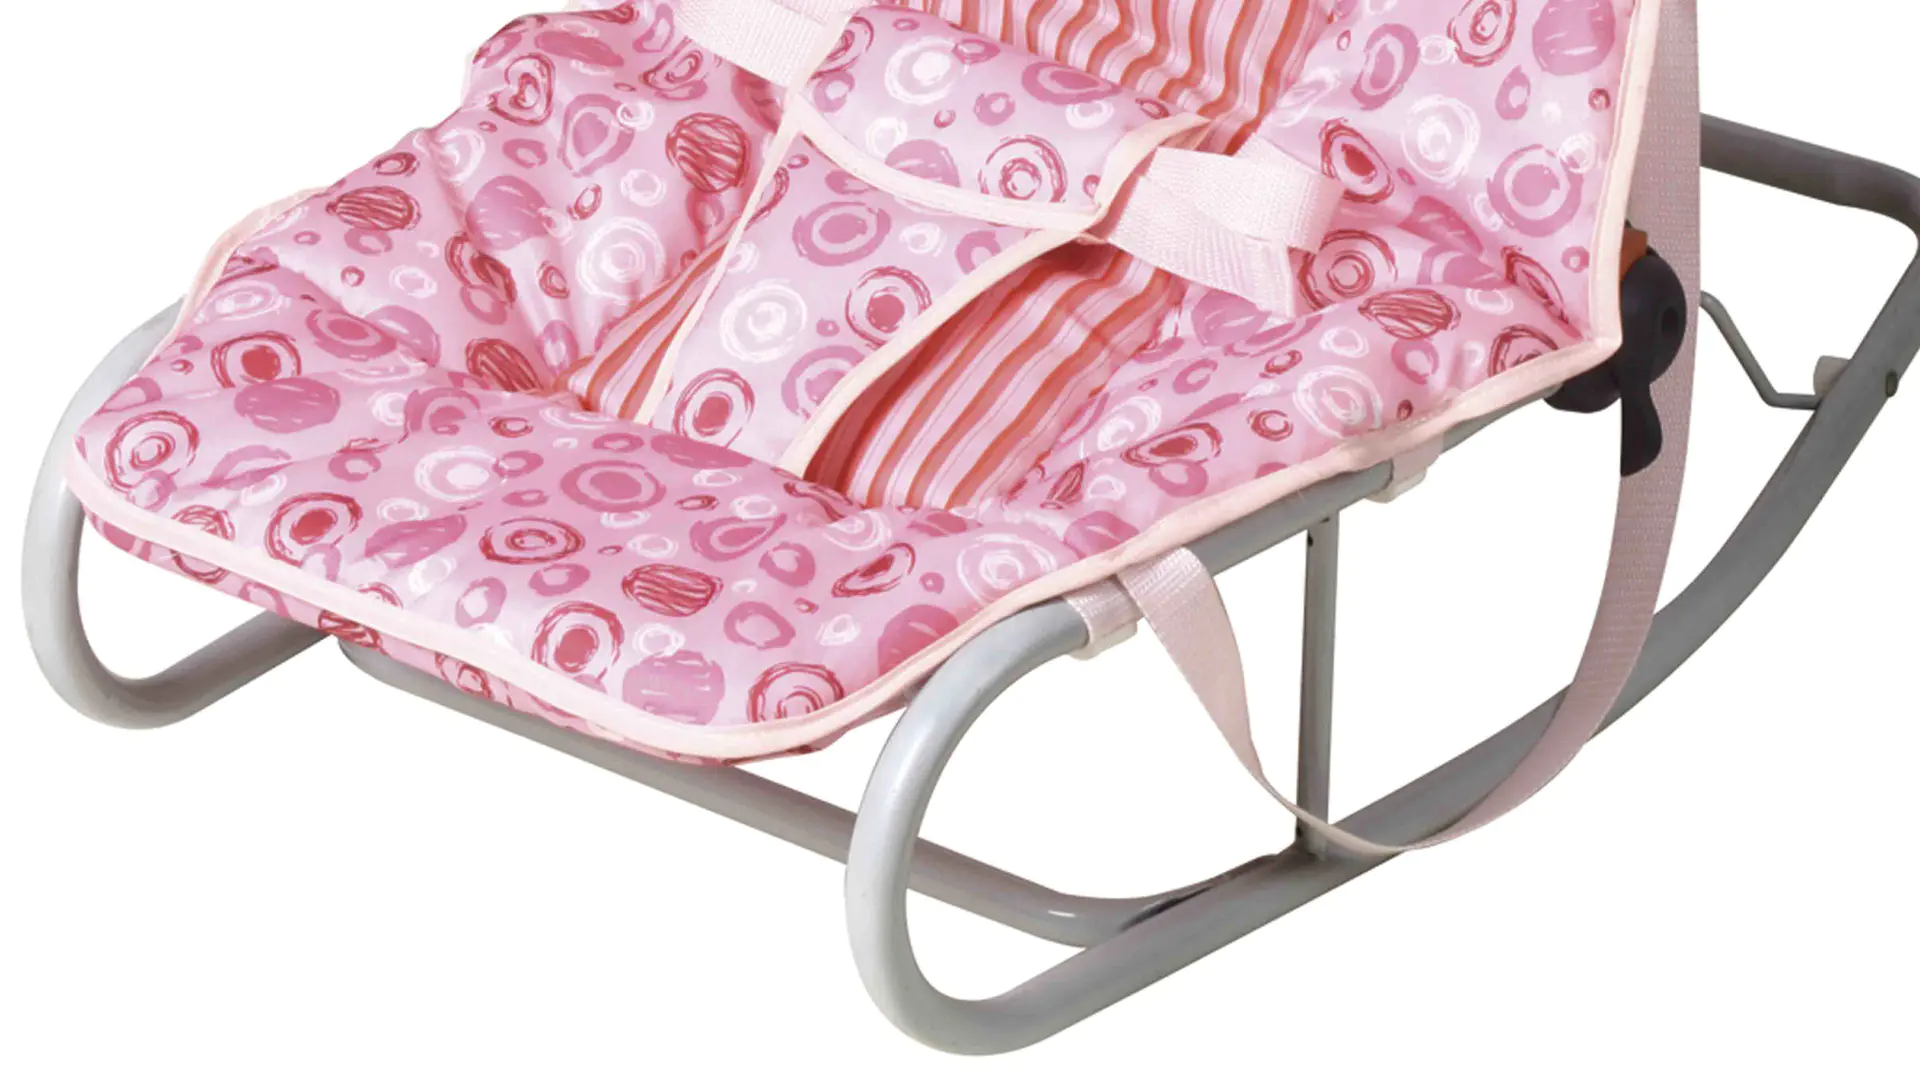 Aoqi portable baby bouncer factory price for infant